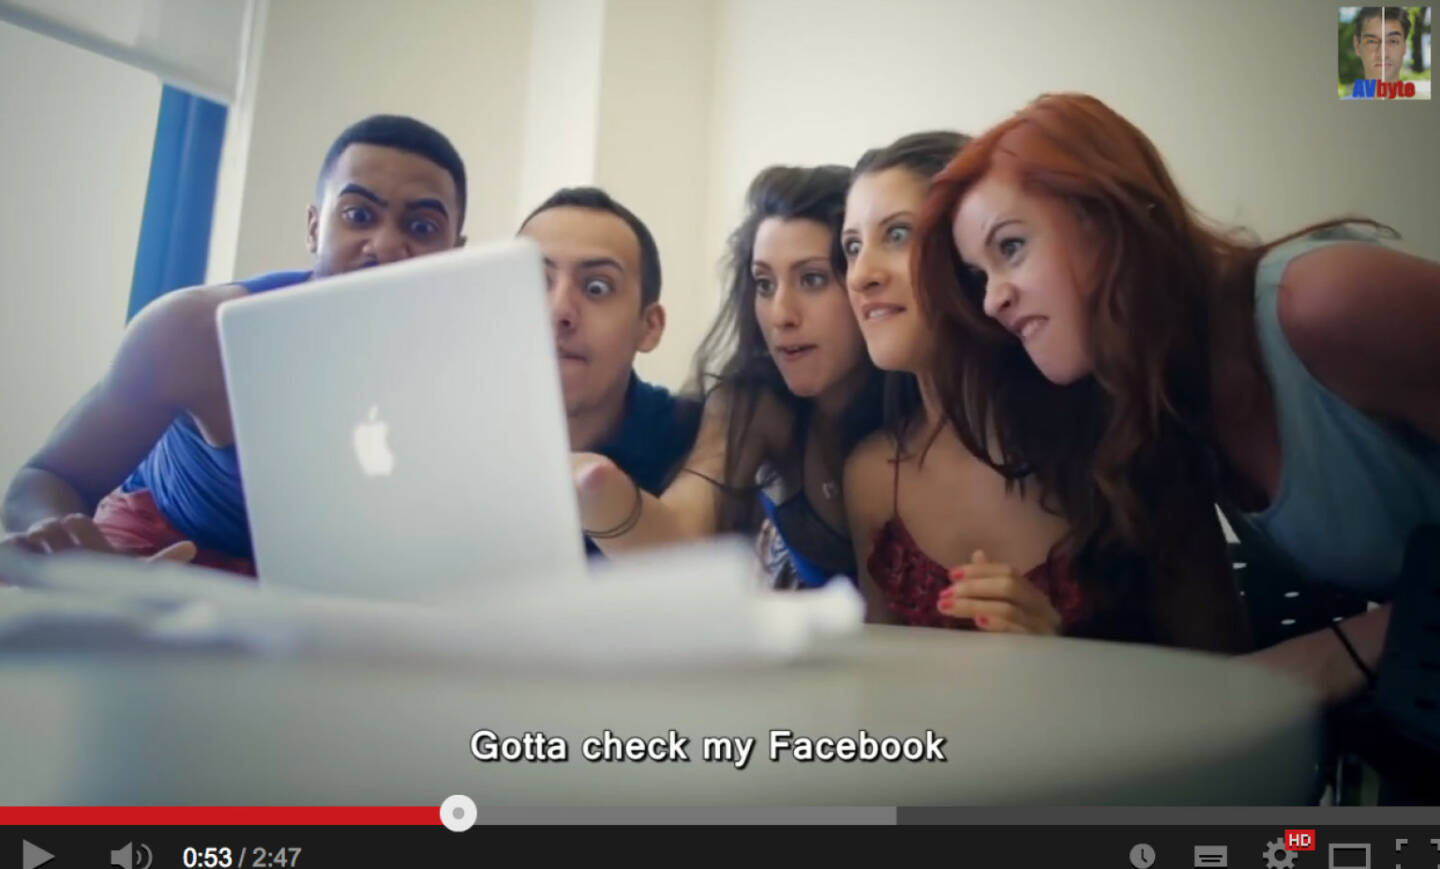 Gotta check my Facebook on an Apple - Video https://www.youtube.com/watch?v=Y2JhpNbe2Io